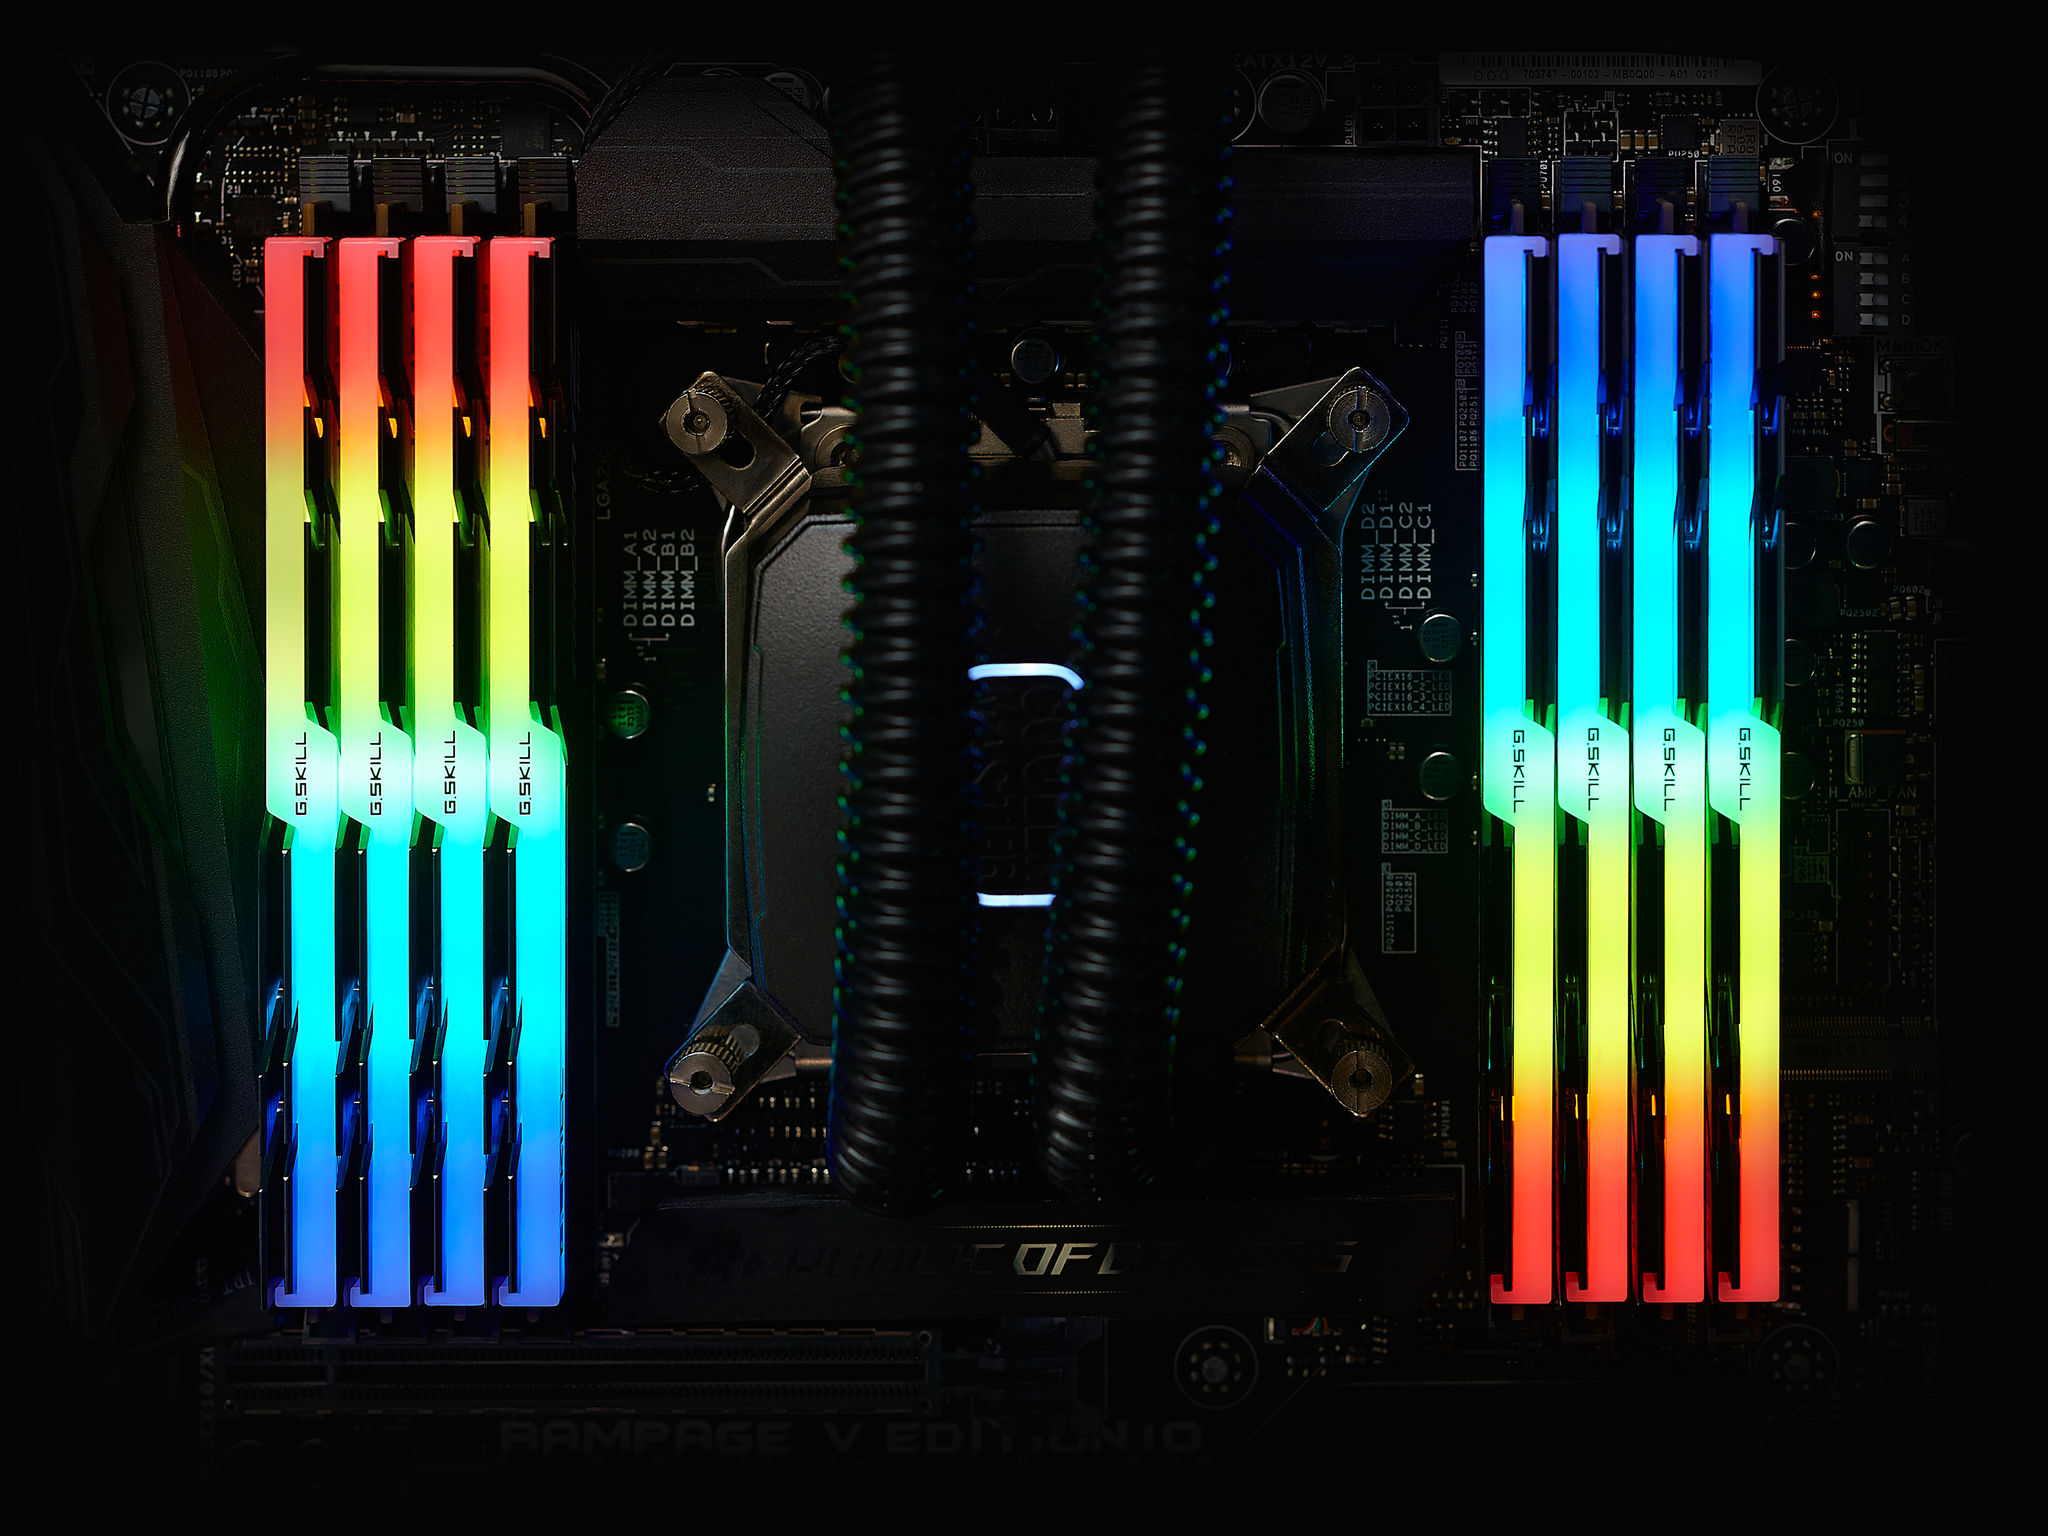 Trident Z RGB DDR4 Memory | iF WORLD DESIGN GUIDE